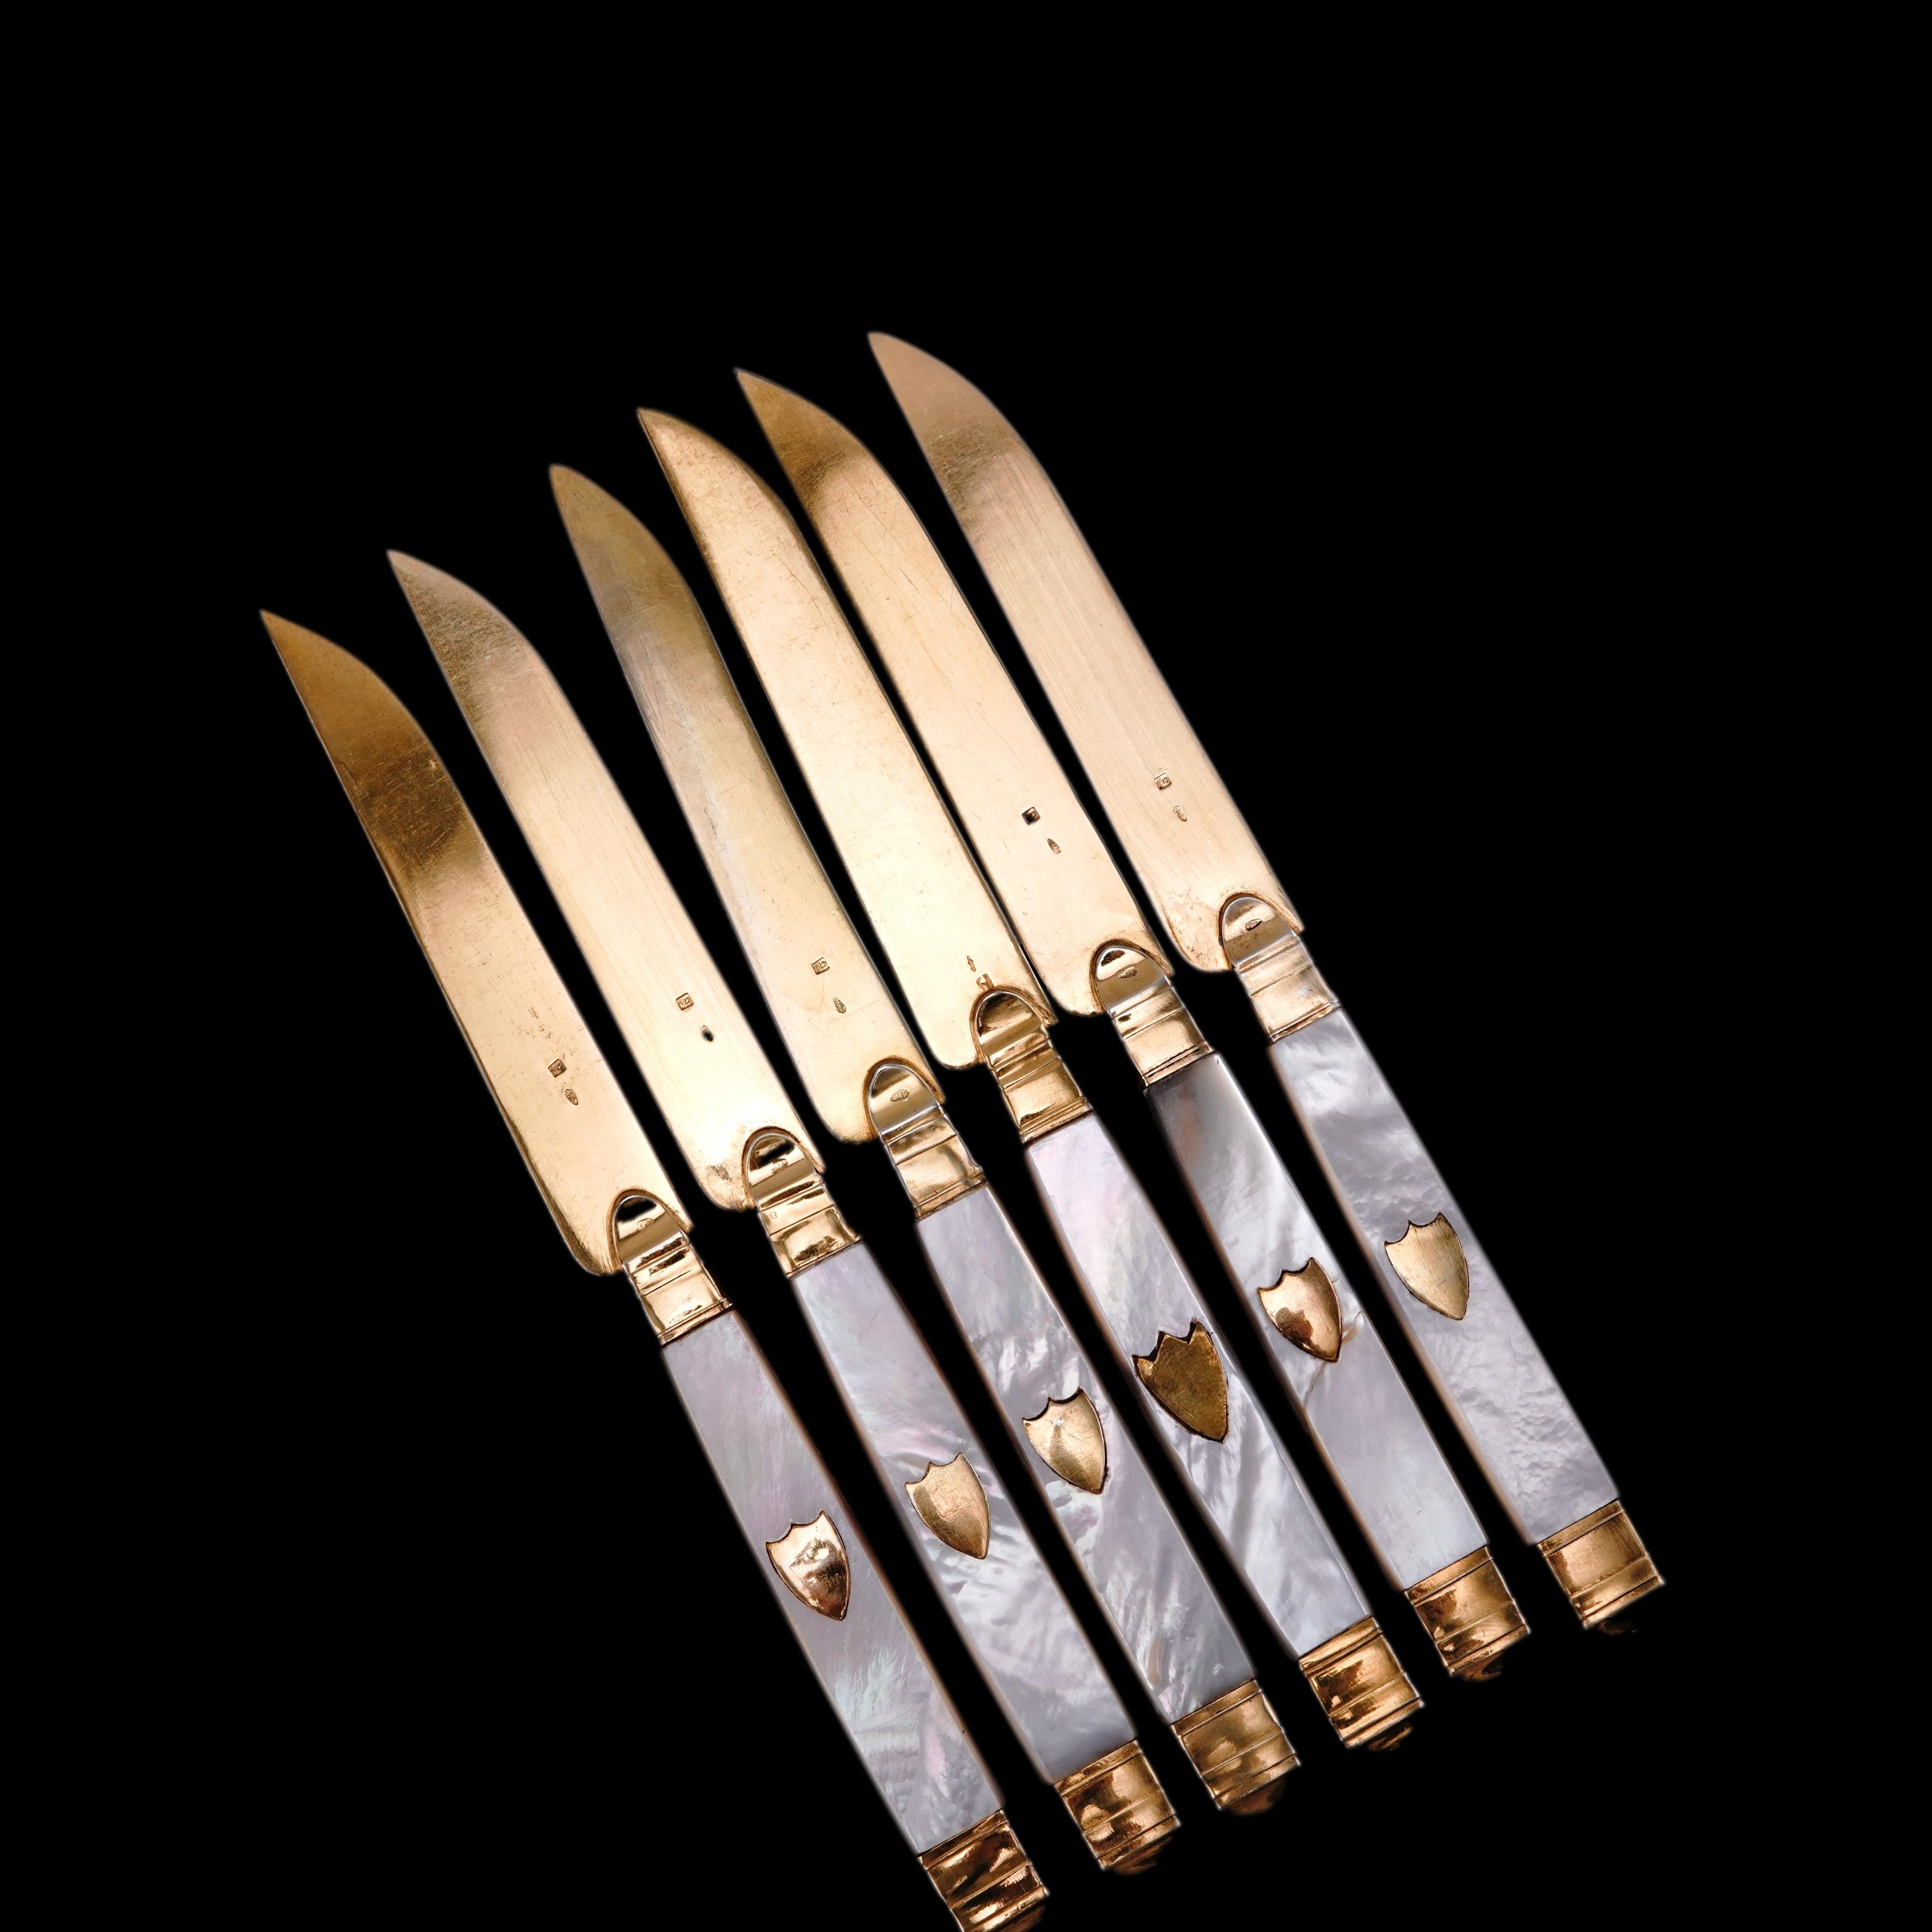 Antique Solid Silver Gilt Mother of Pearl Knives Set of 6 - 19th C. Dutch For Sale 4